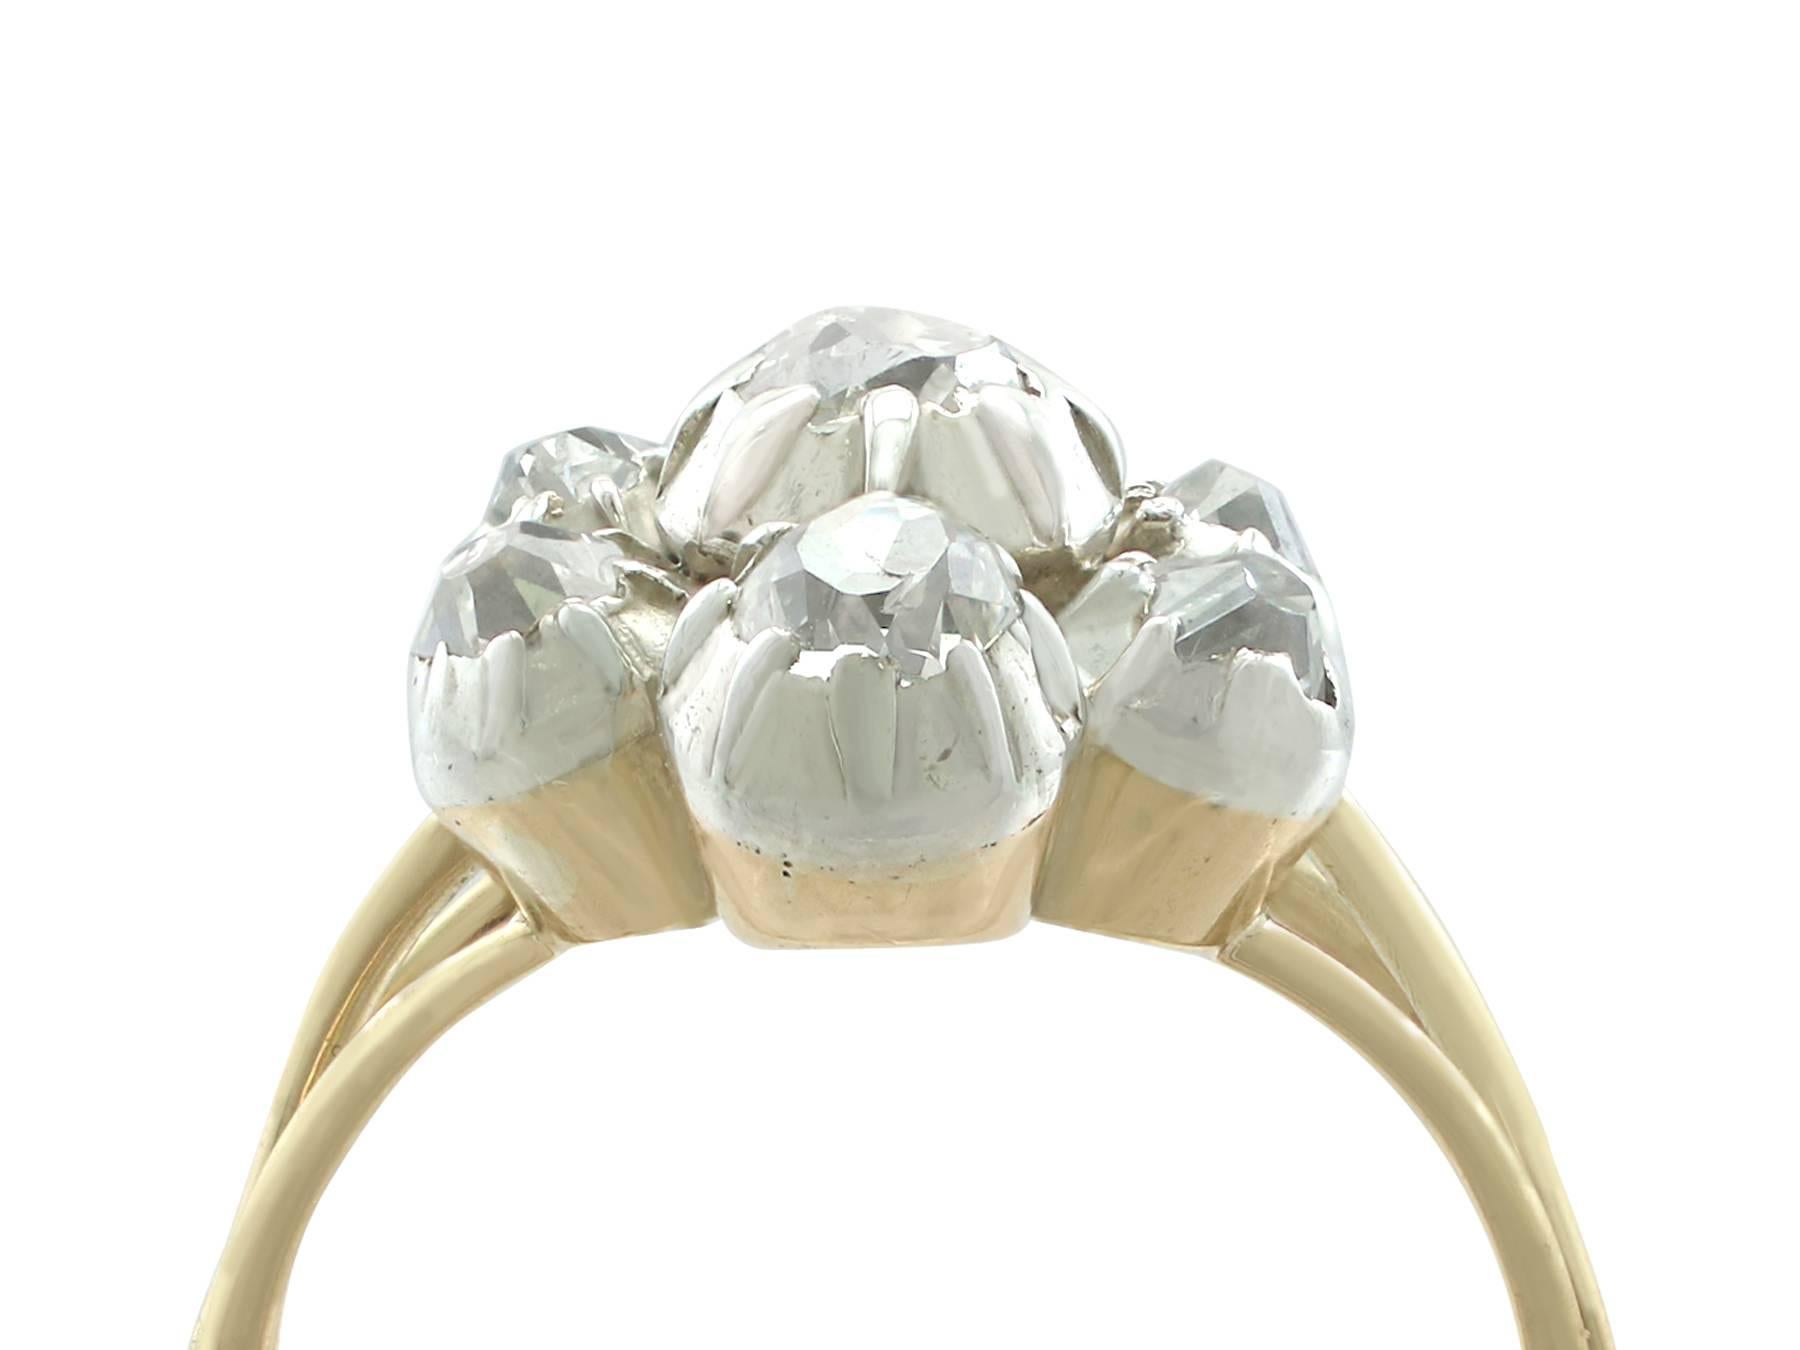 An impressive Georgian 1.28 carat diamond and 18 carat yellow gold, silver set cluster style ring; part of 's diverse antique jewellery and estate jewelry collections.

This fine and impressive antique diamond cluster ring has been crafted in 18 ct